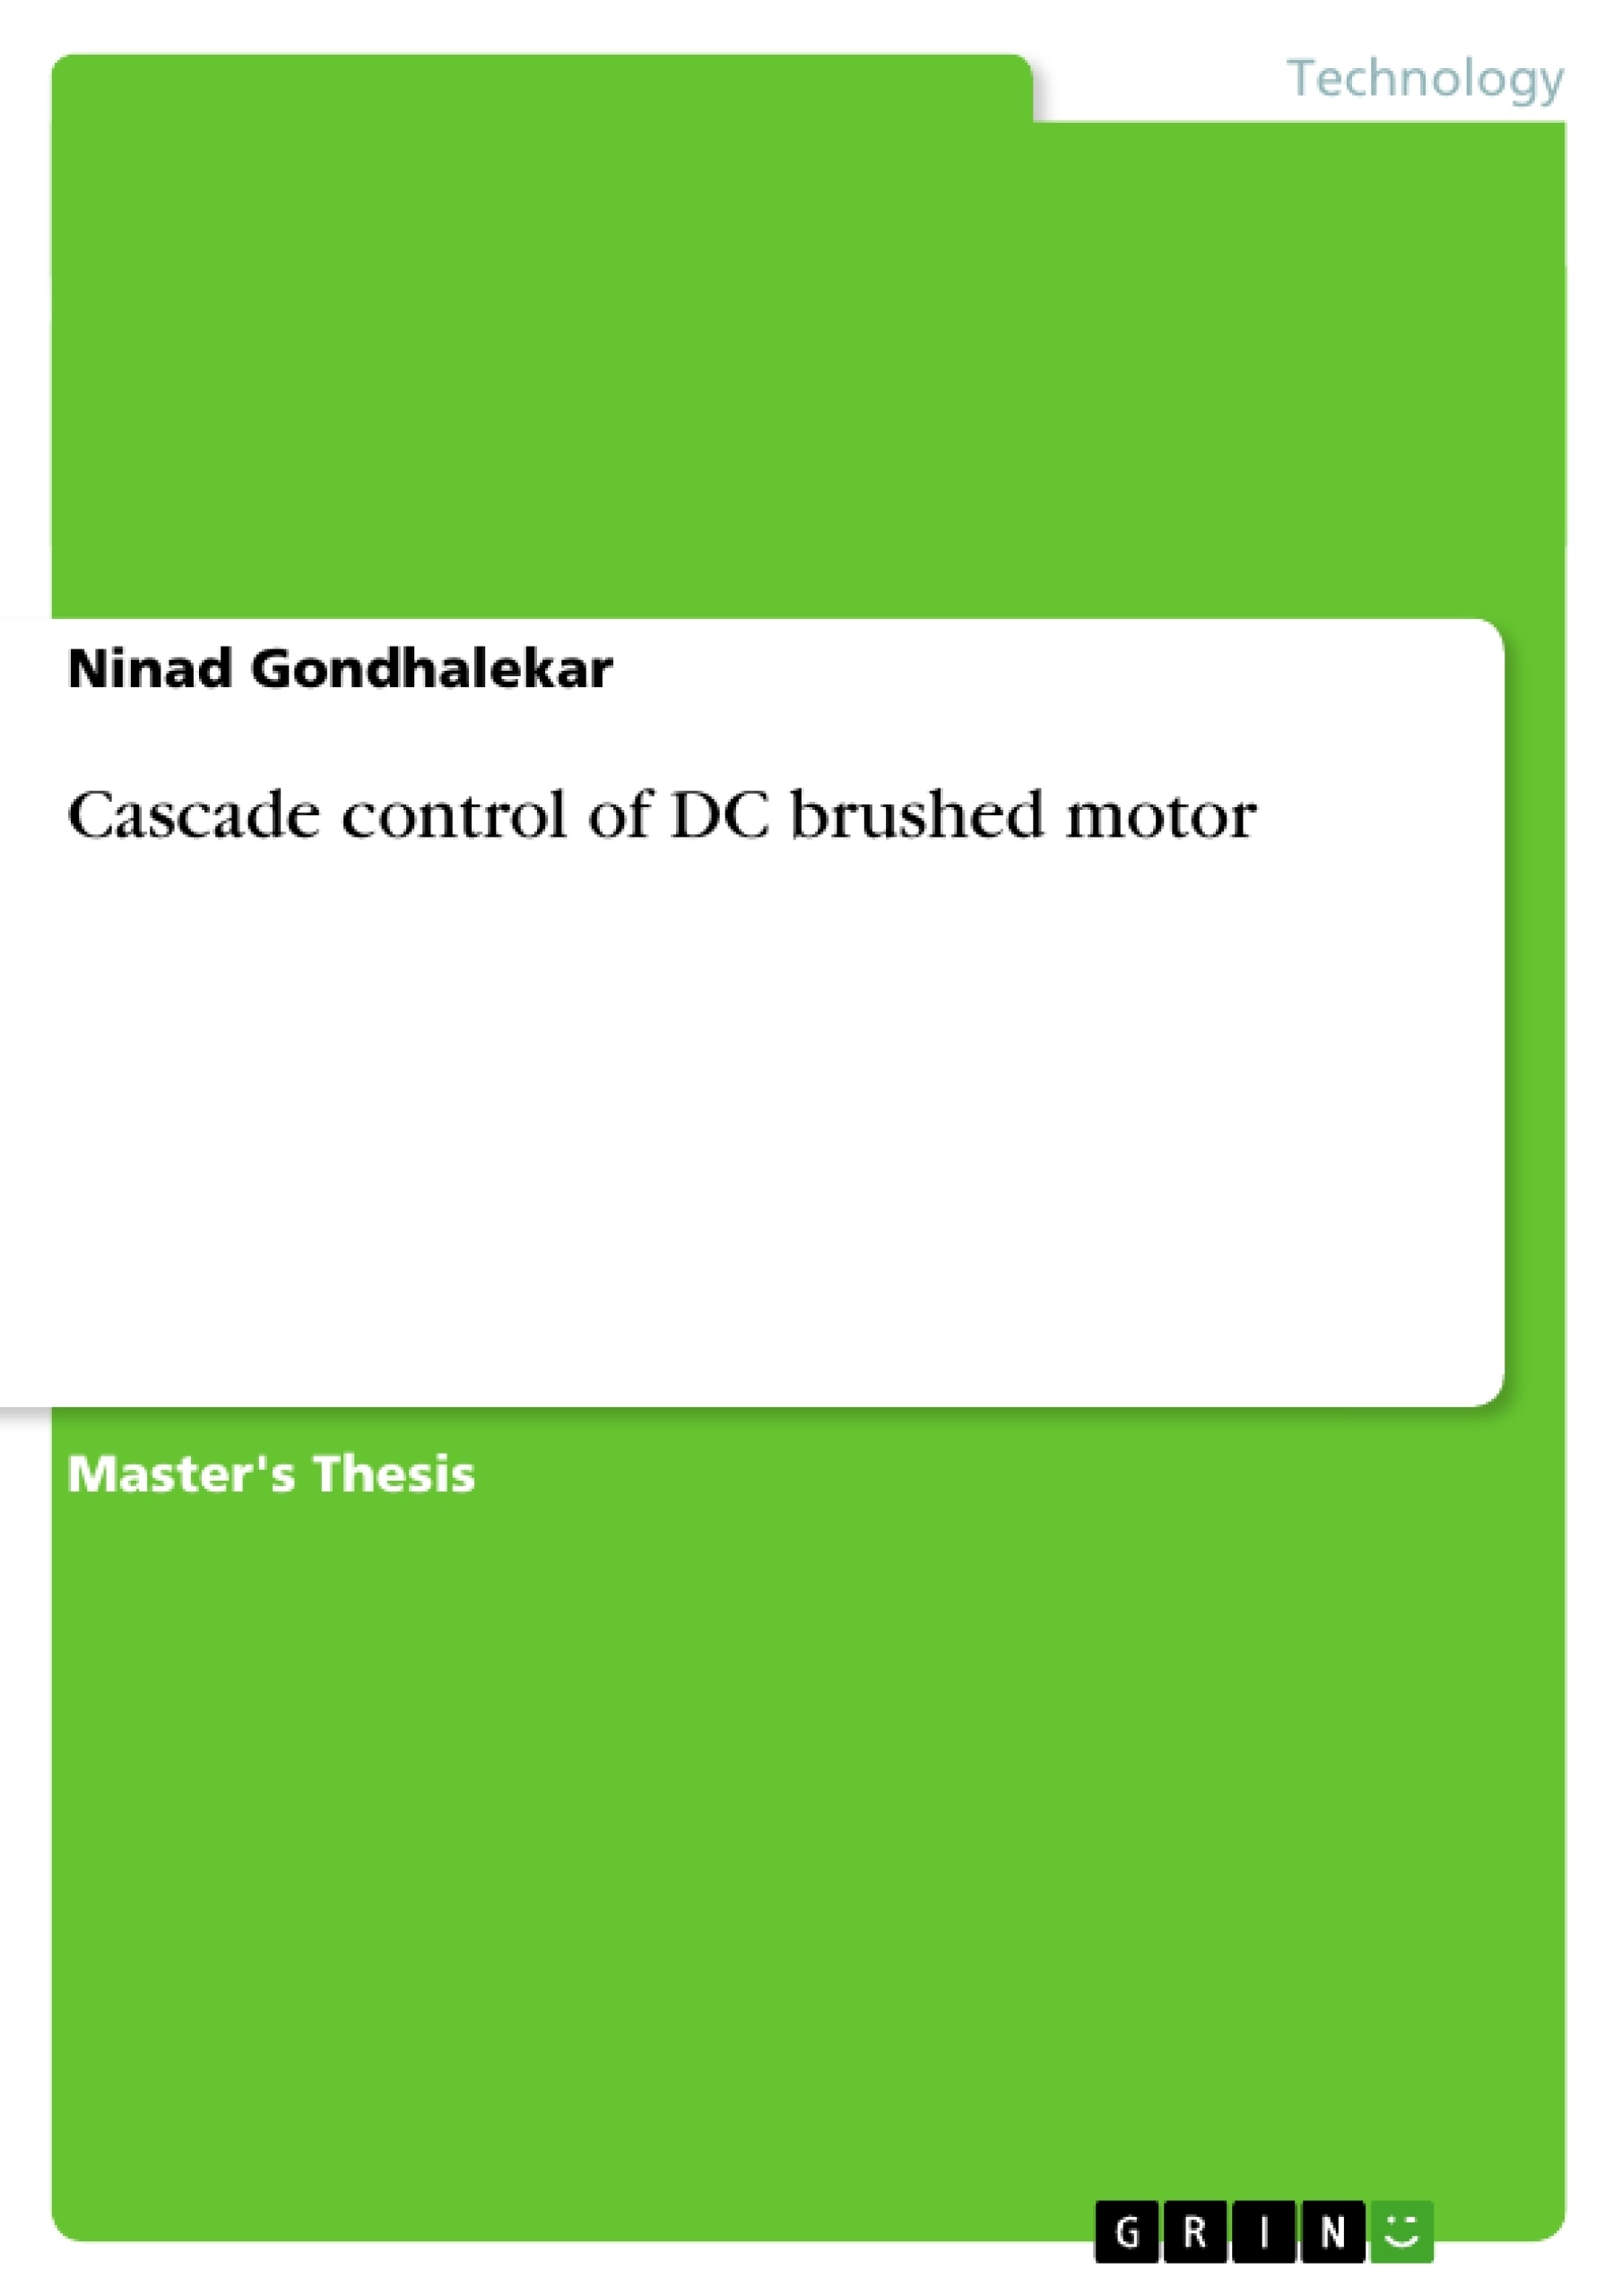 Title: Cascade control of DC brushed motor